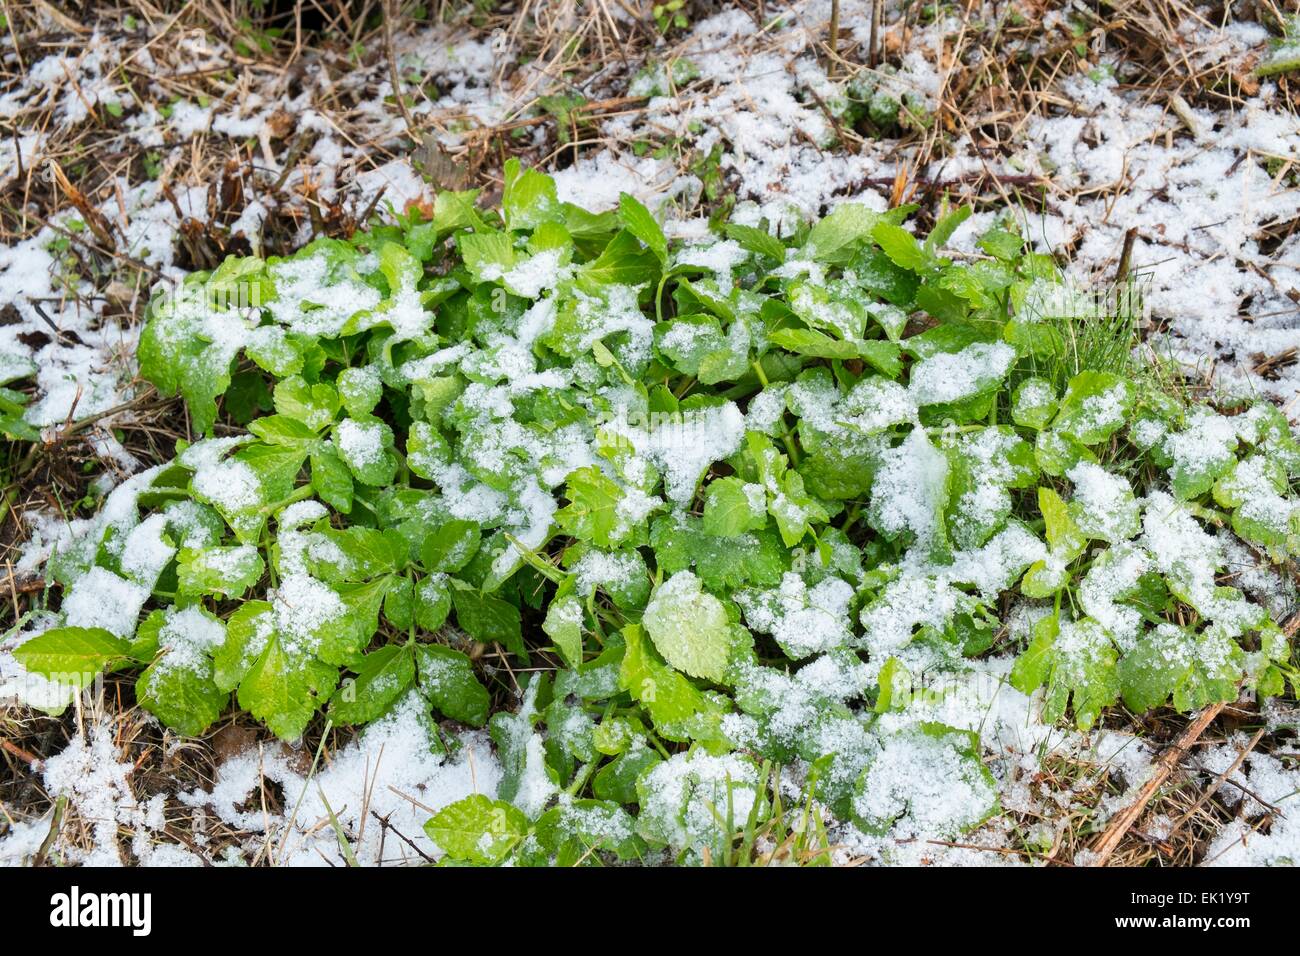 Alexanders - Smyrnium olusatrum, new growth with covering of snow, Norfolk, England, January Stock Photo